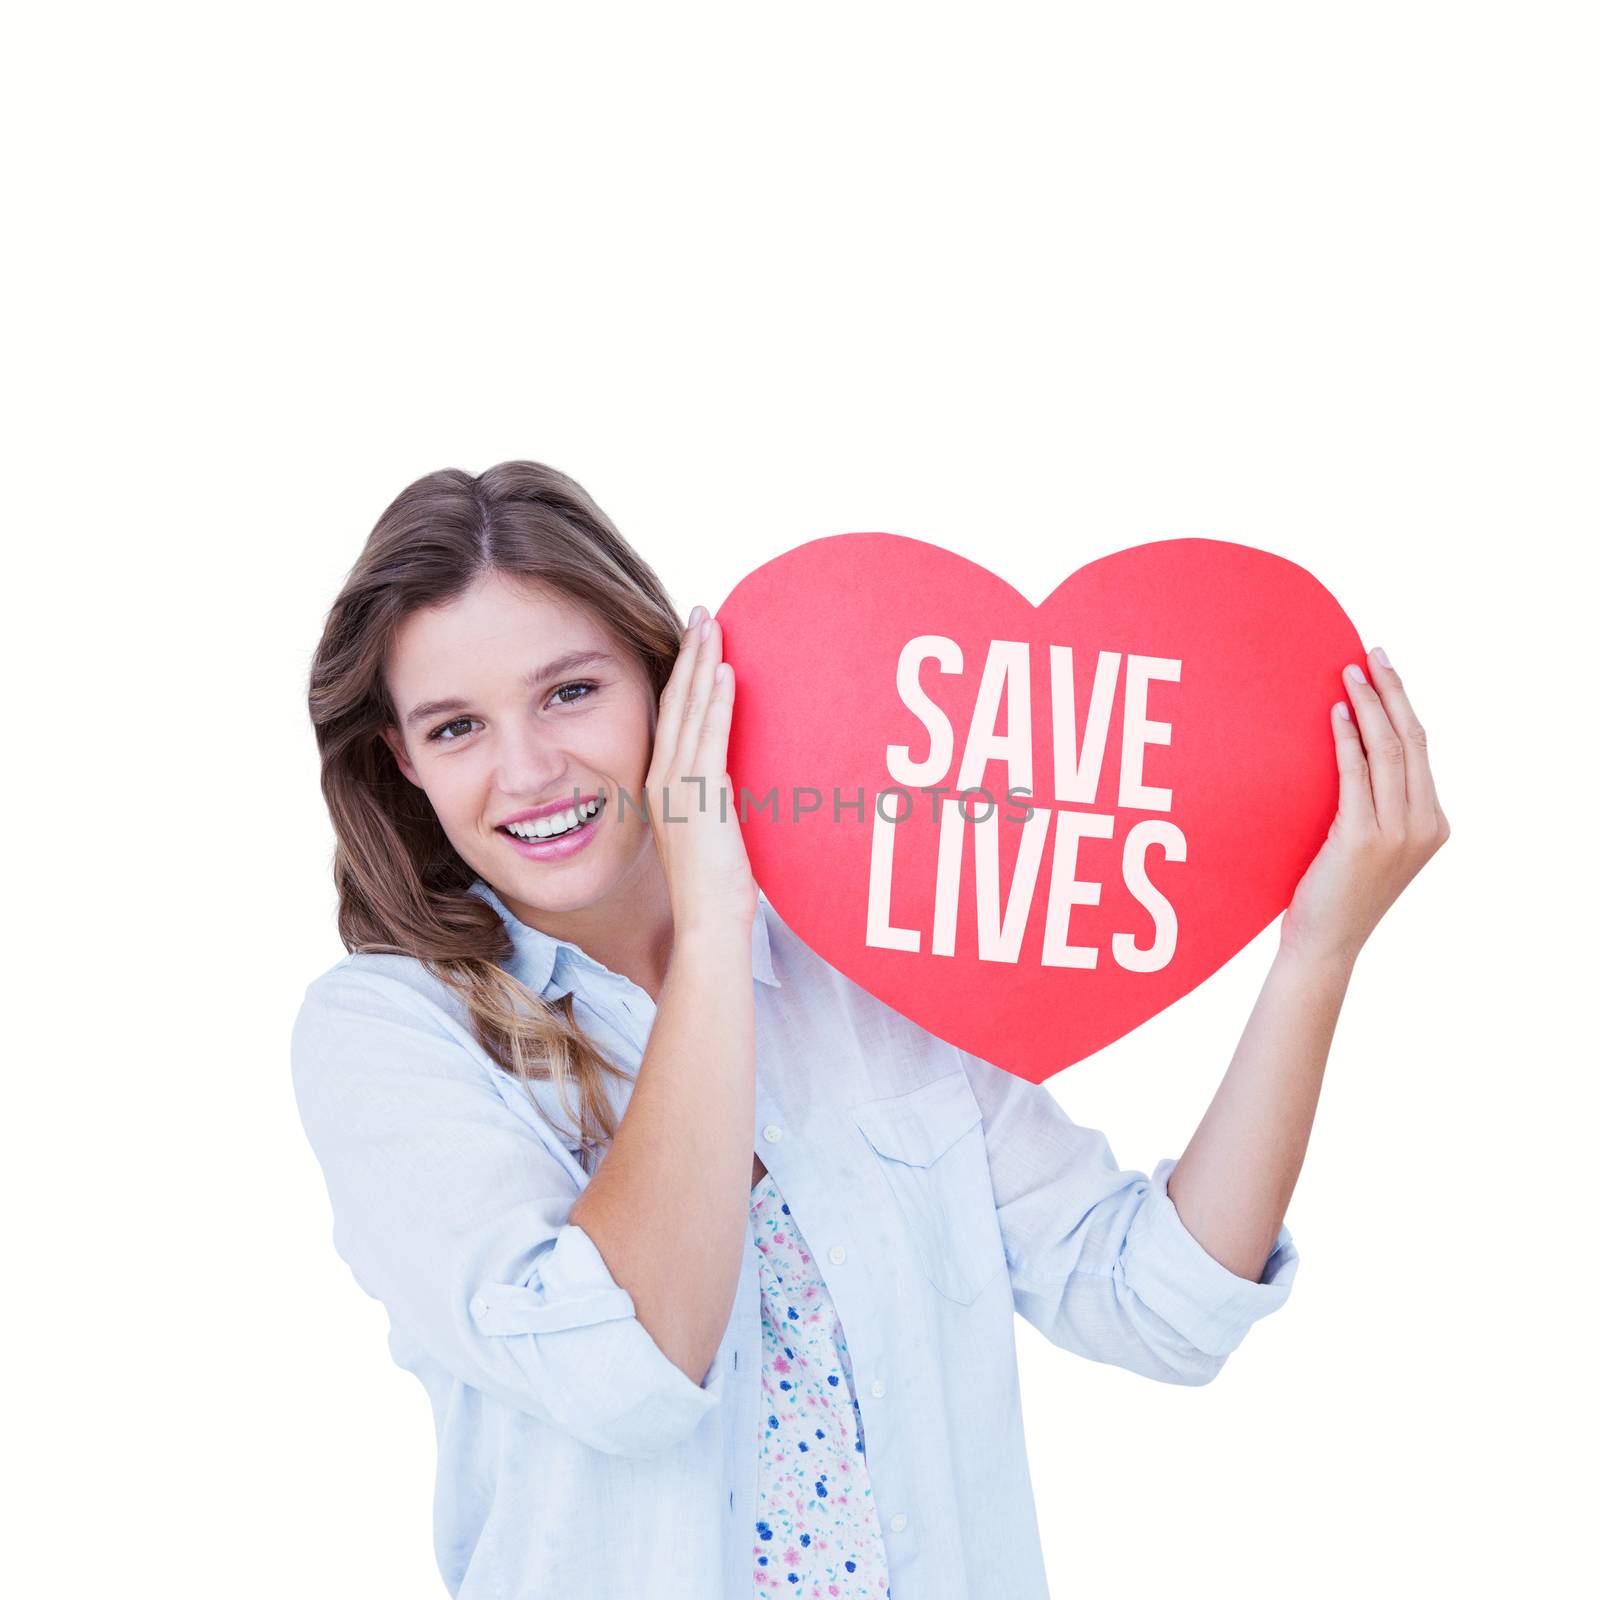 Woman holding heart card  against save lives